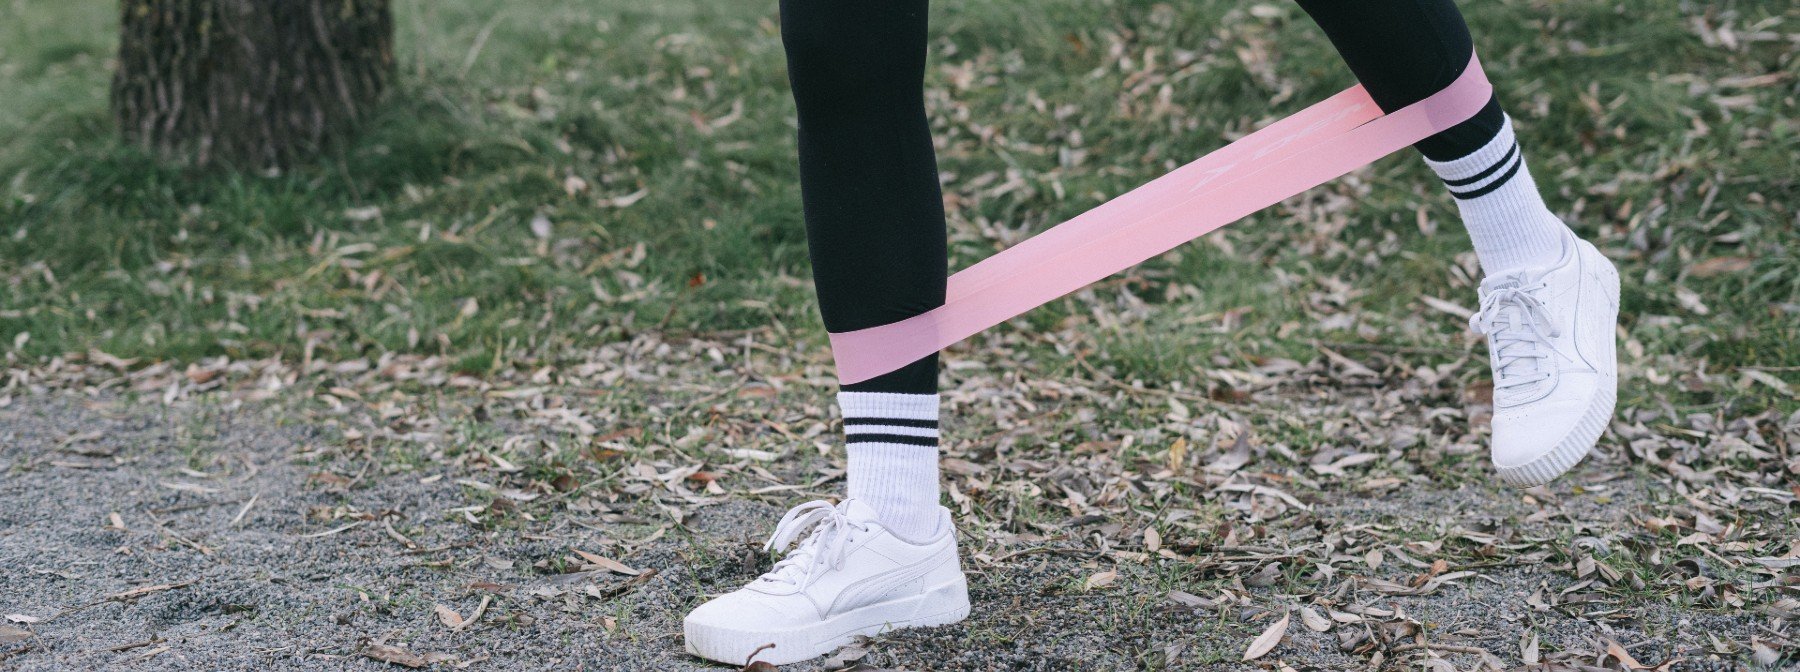 14 Resistance Band Workouts for Beginners